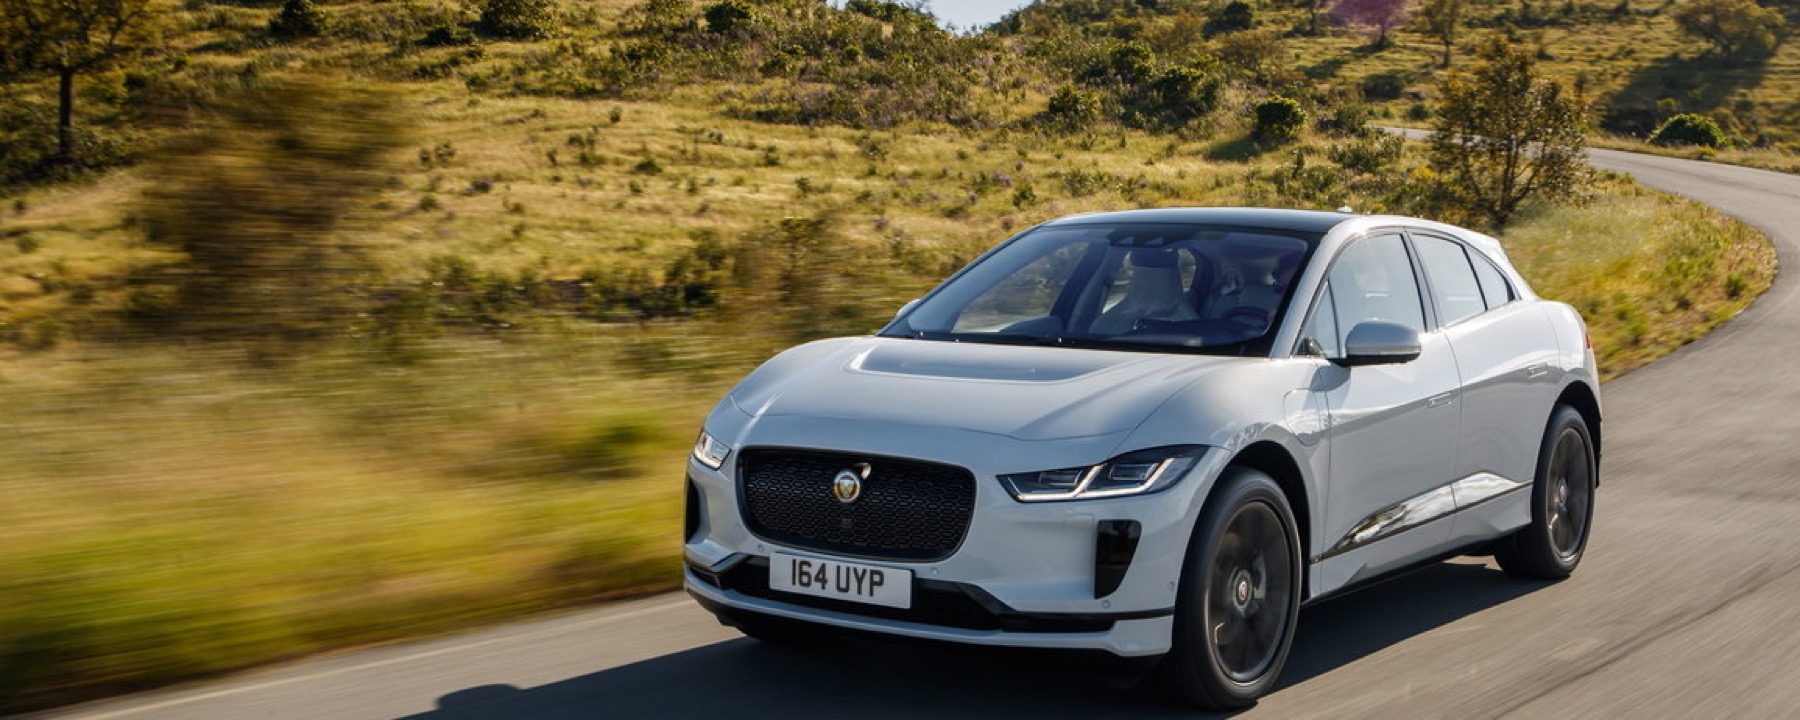 Jaguar I-PACE Receives Recognition From TopGear Magazine - indiGO Auto ...